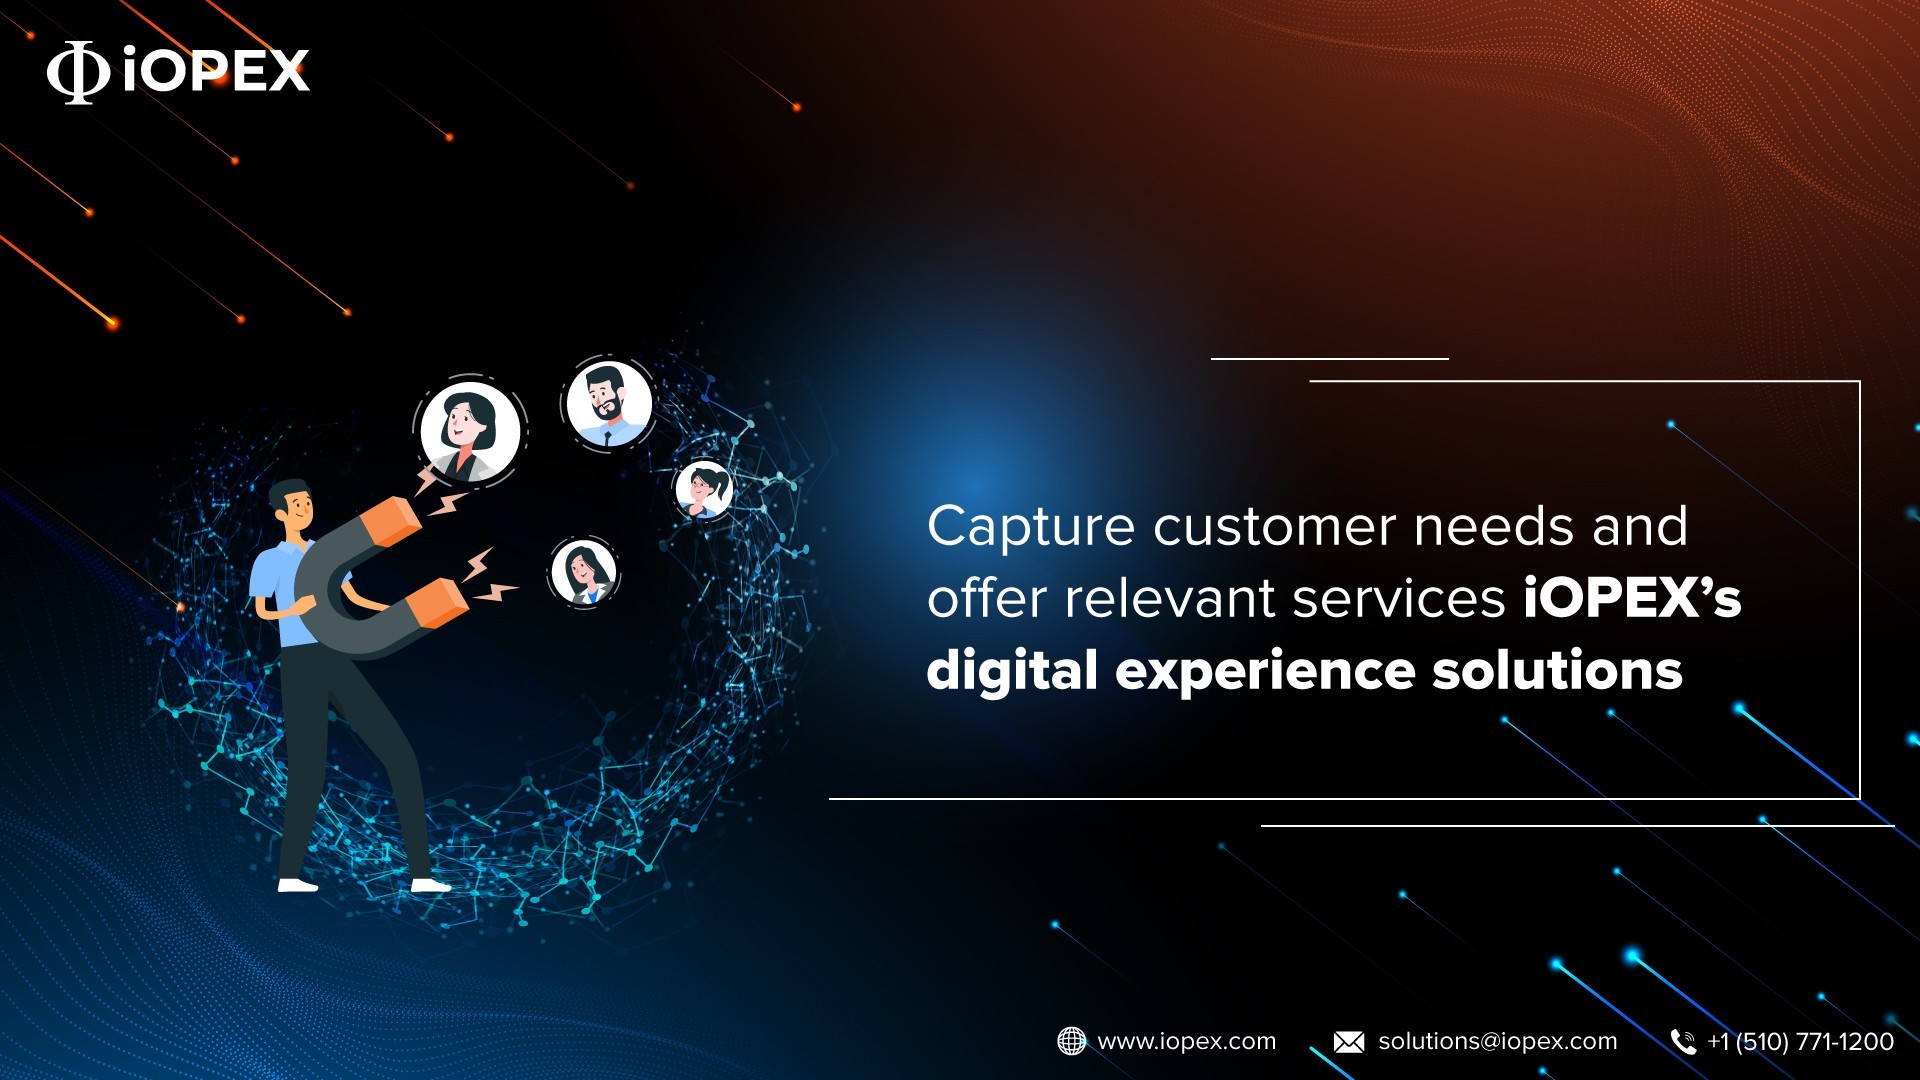 Capture customer needs and offer relevant services iOPEX’s digital experience solutions